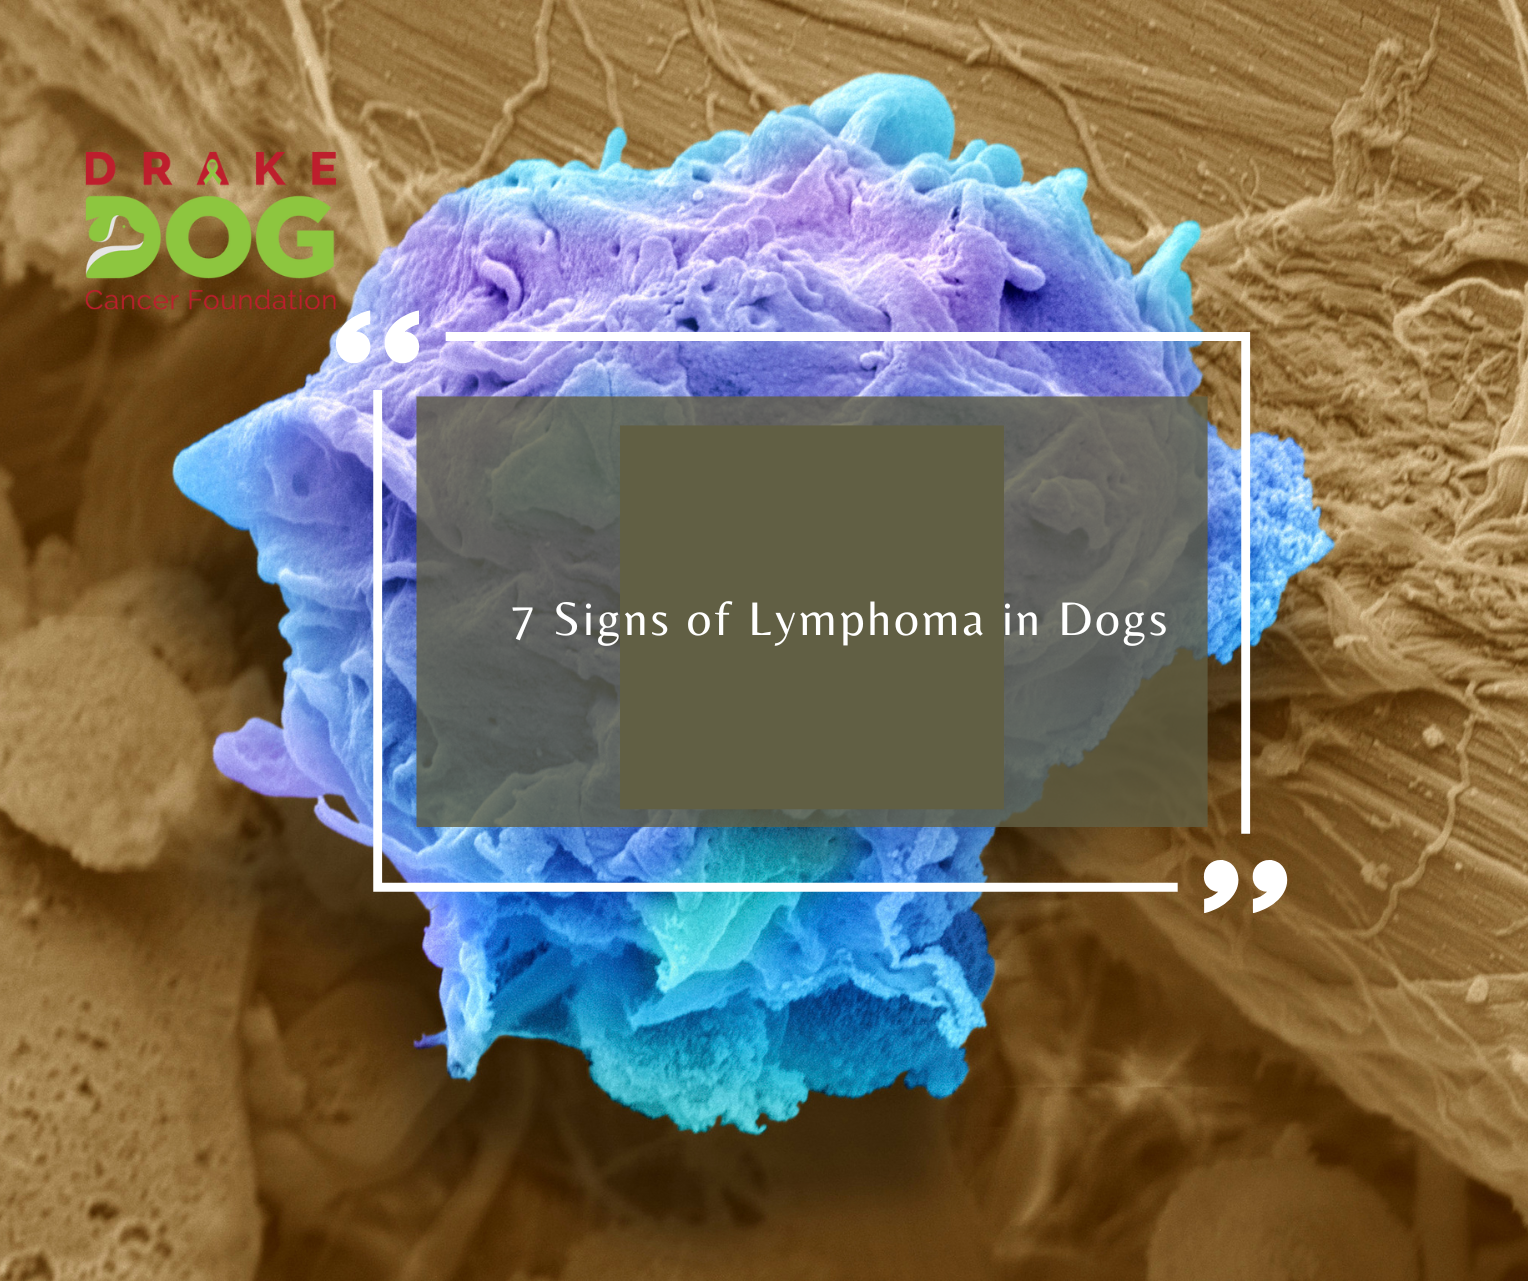 7 Signs of Lymphoma in Dogs